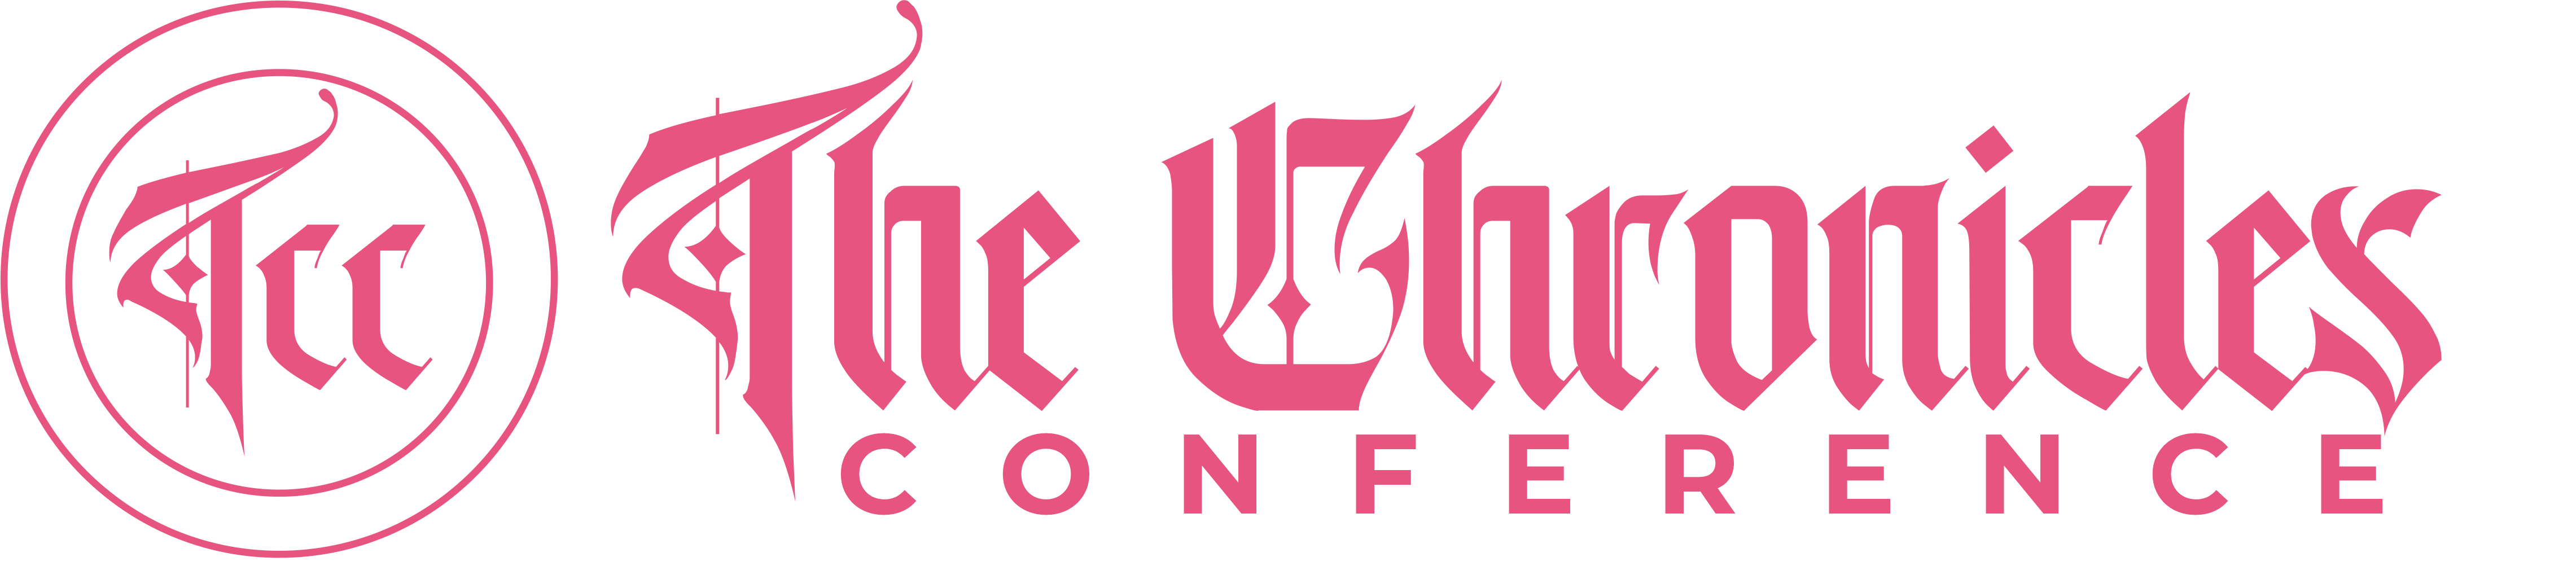 thechroniclesconference.com